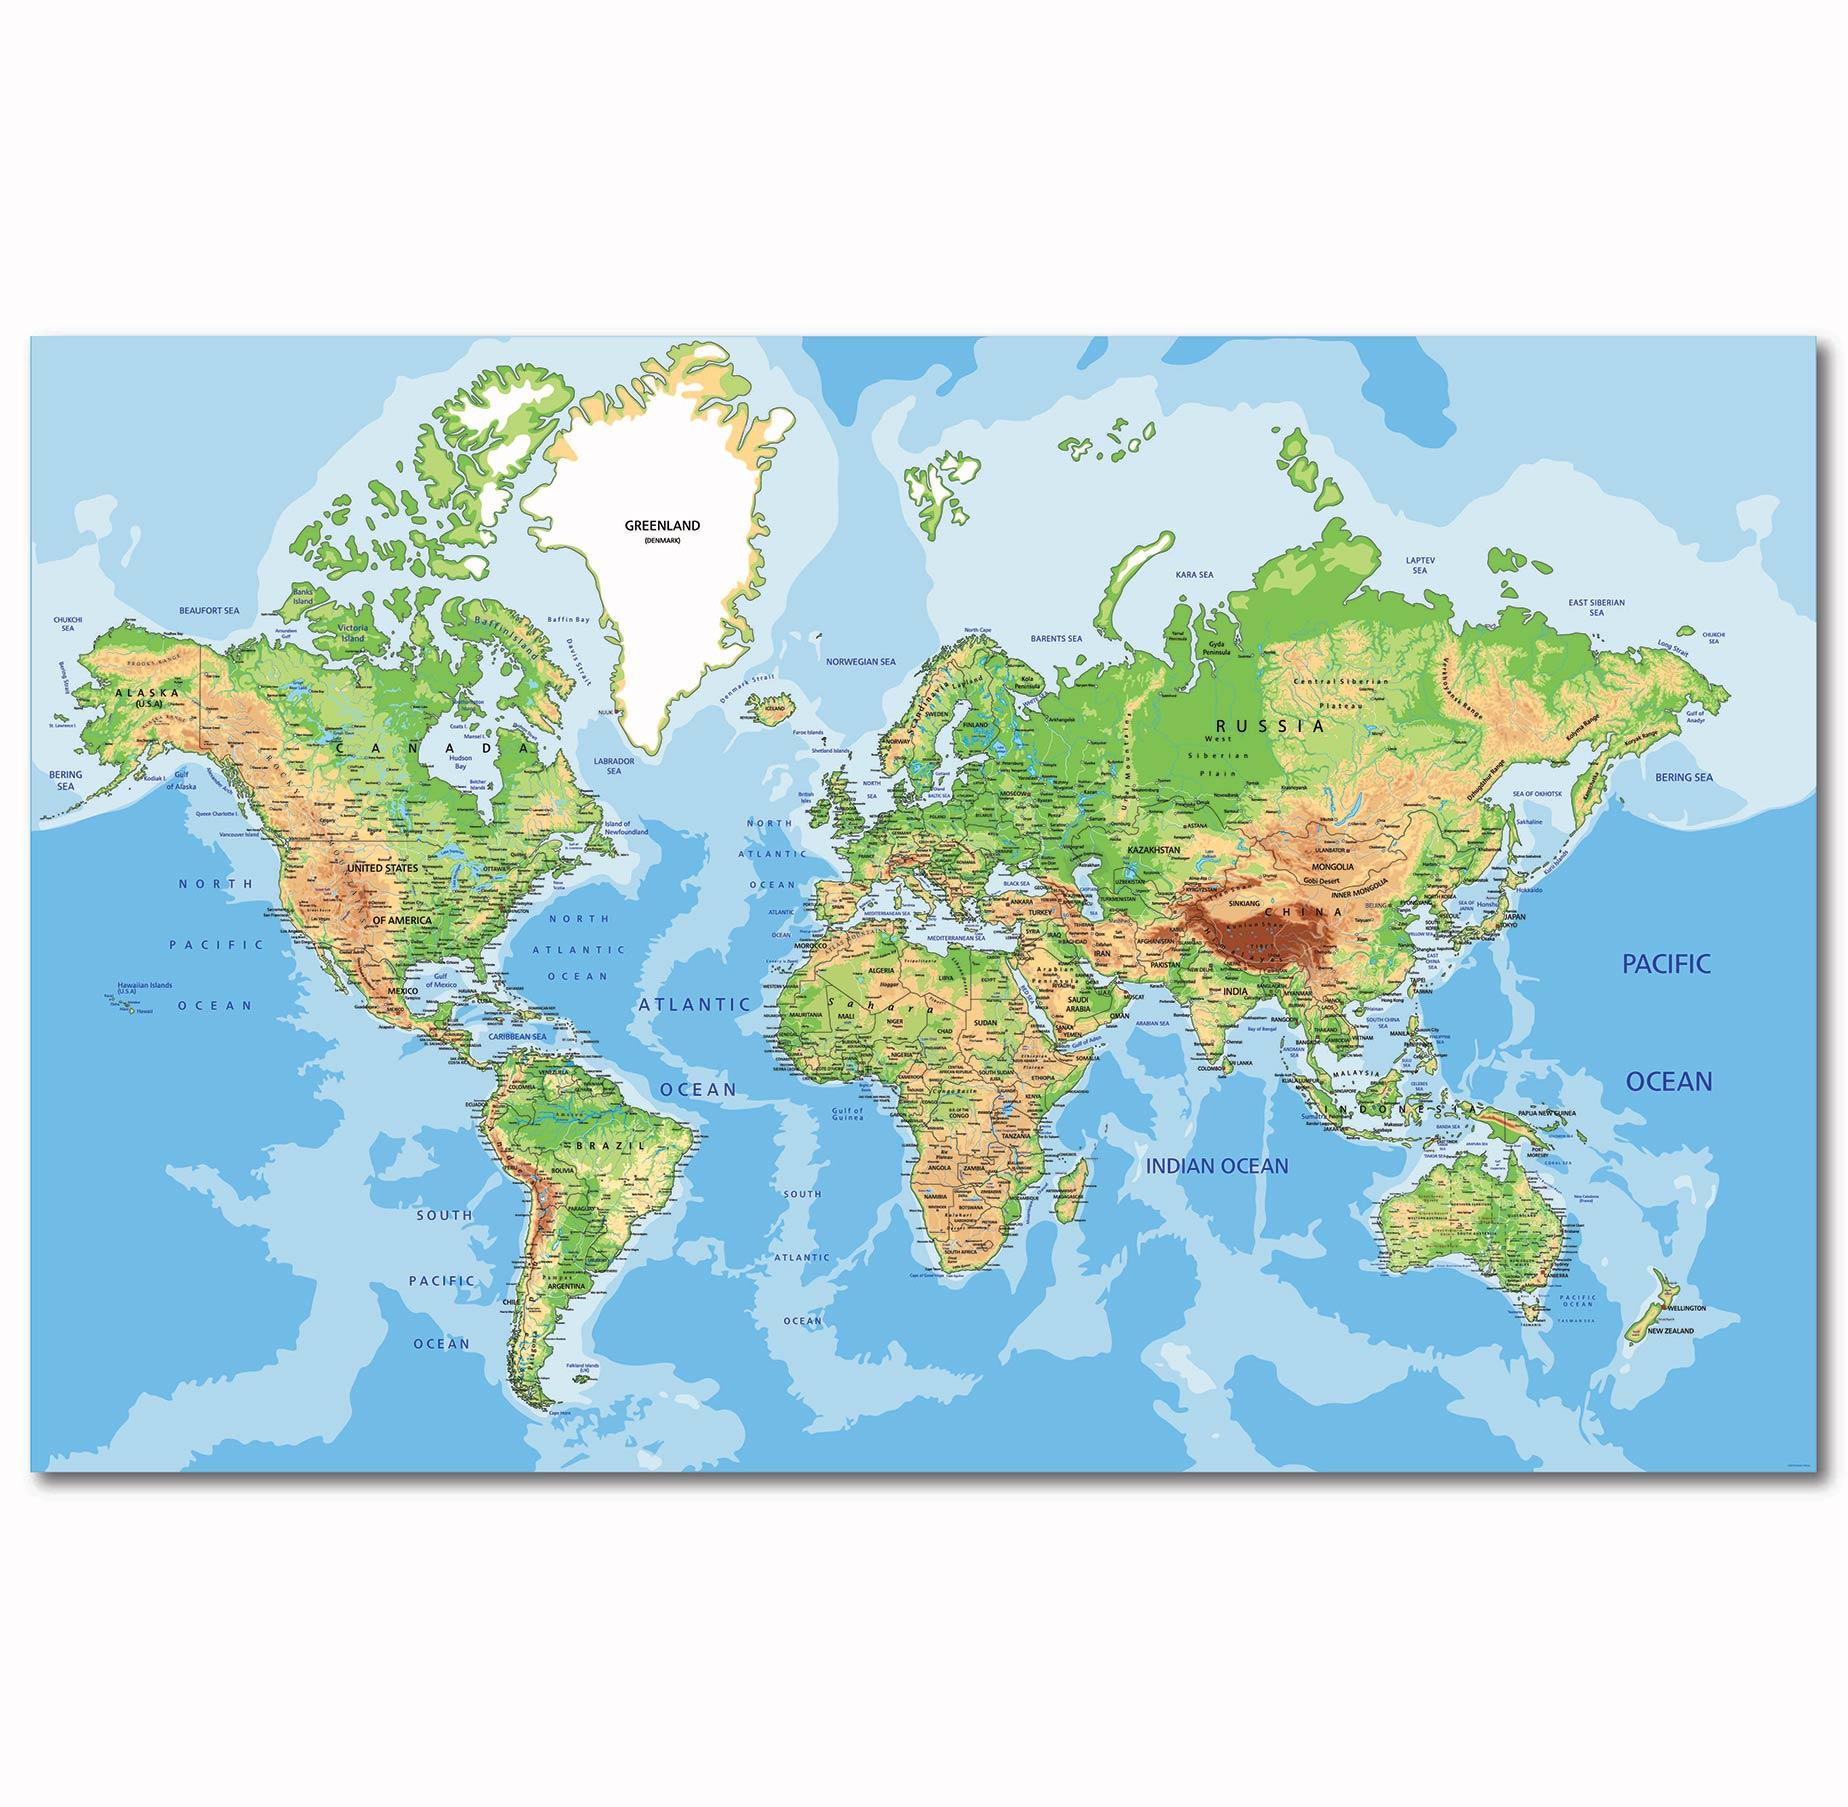 Topographical World Map
